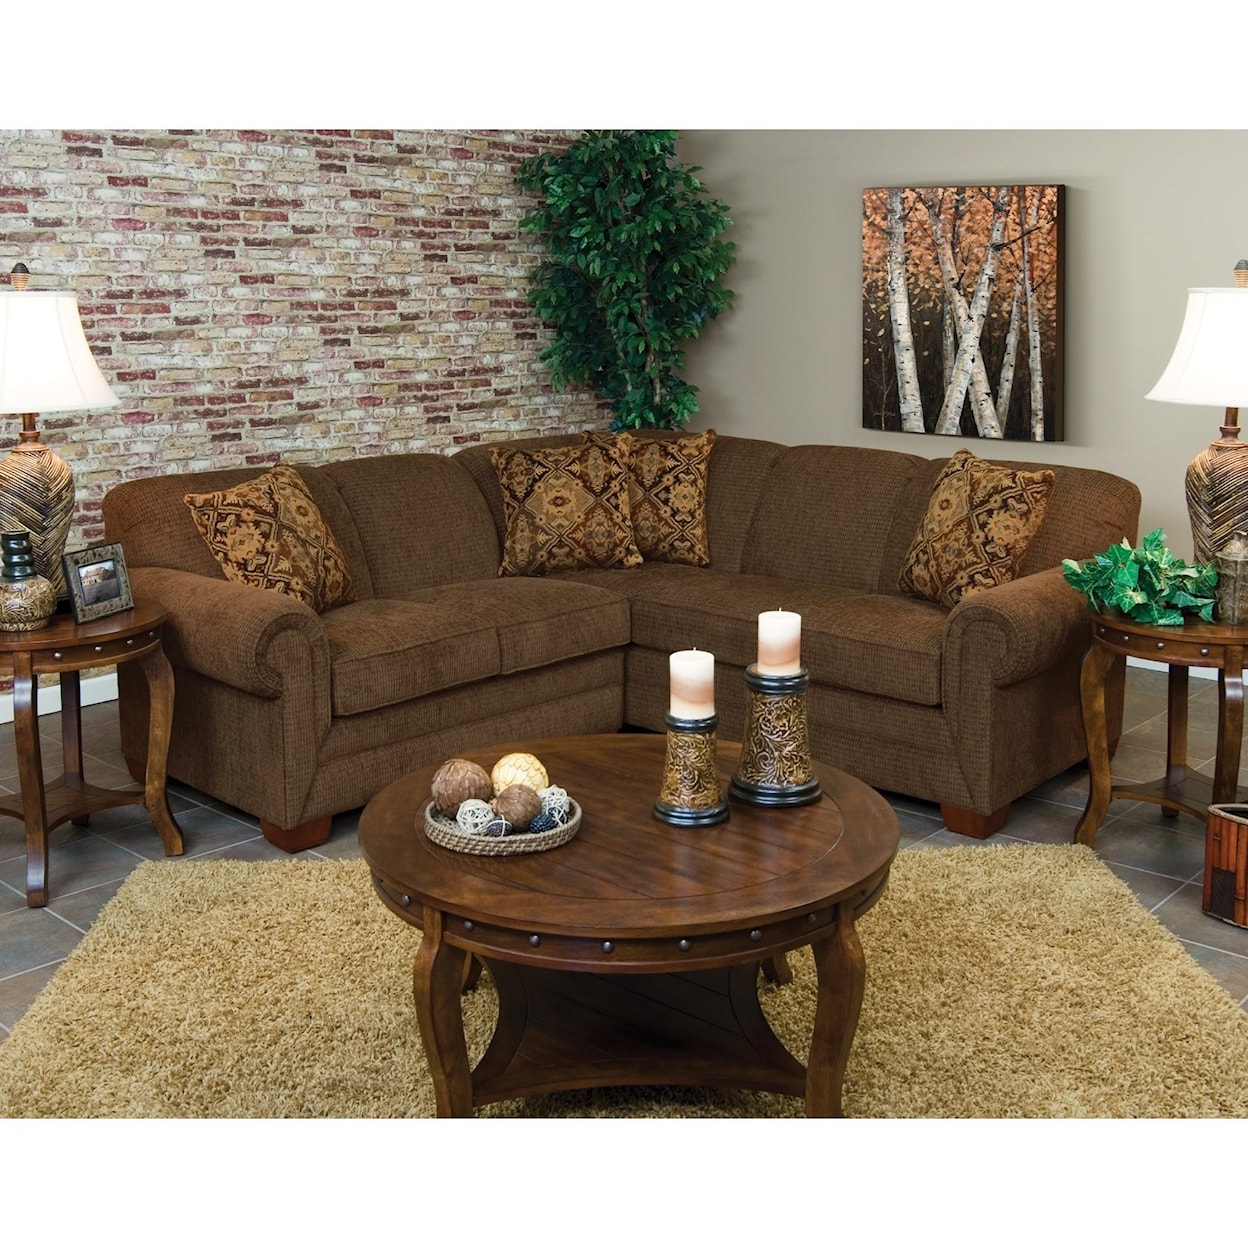 Alexvale V140 Small Sectional Sofa for 3-4 People